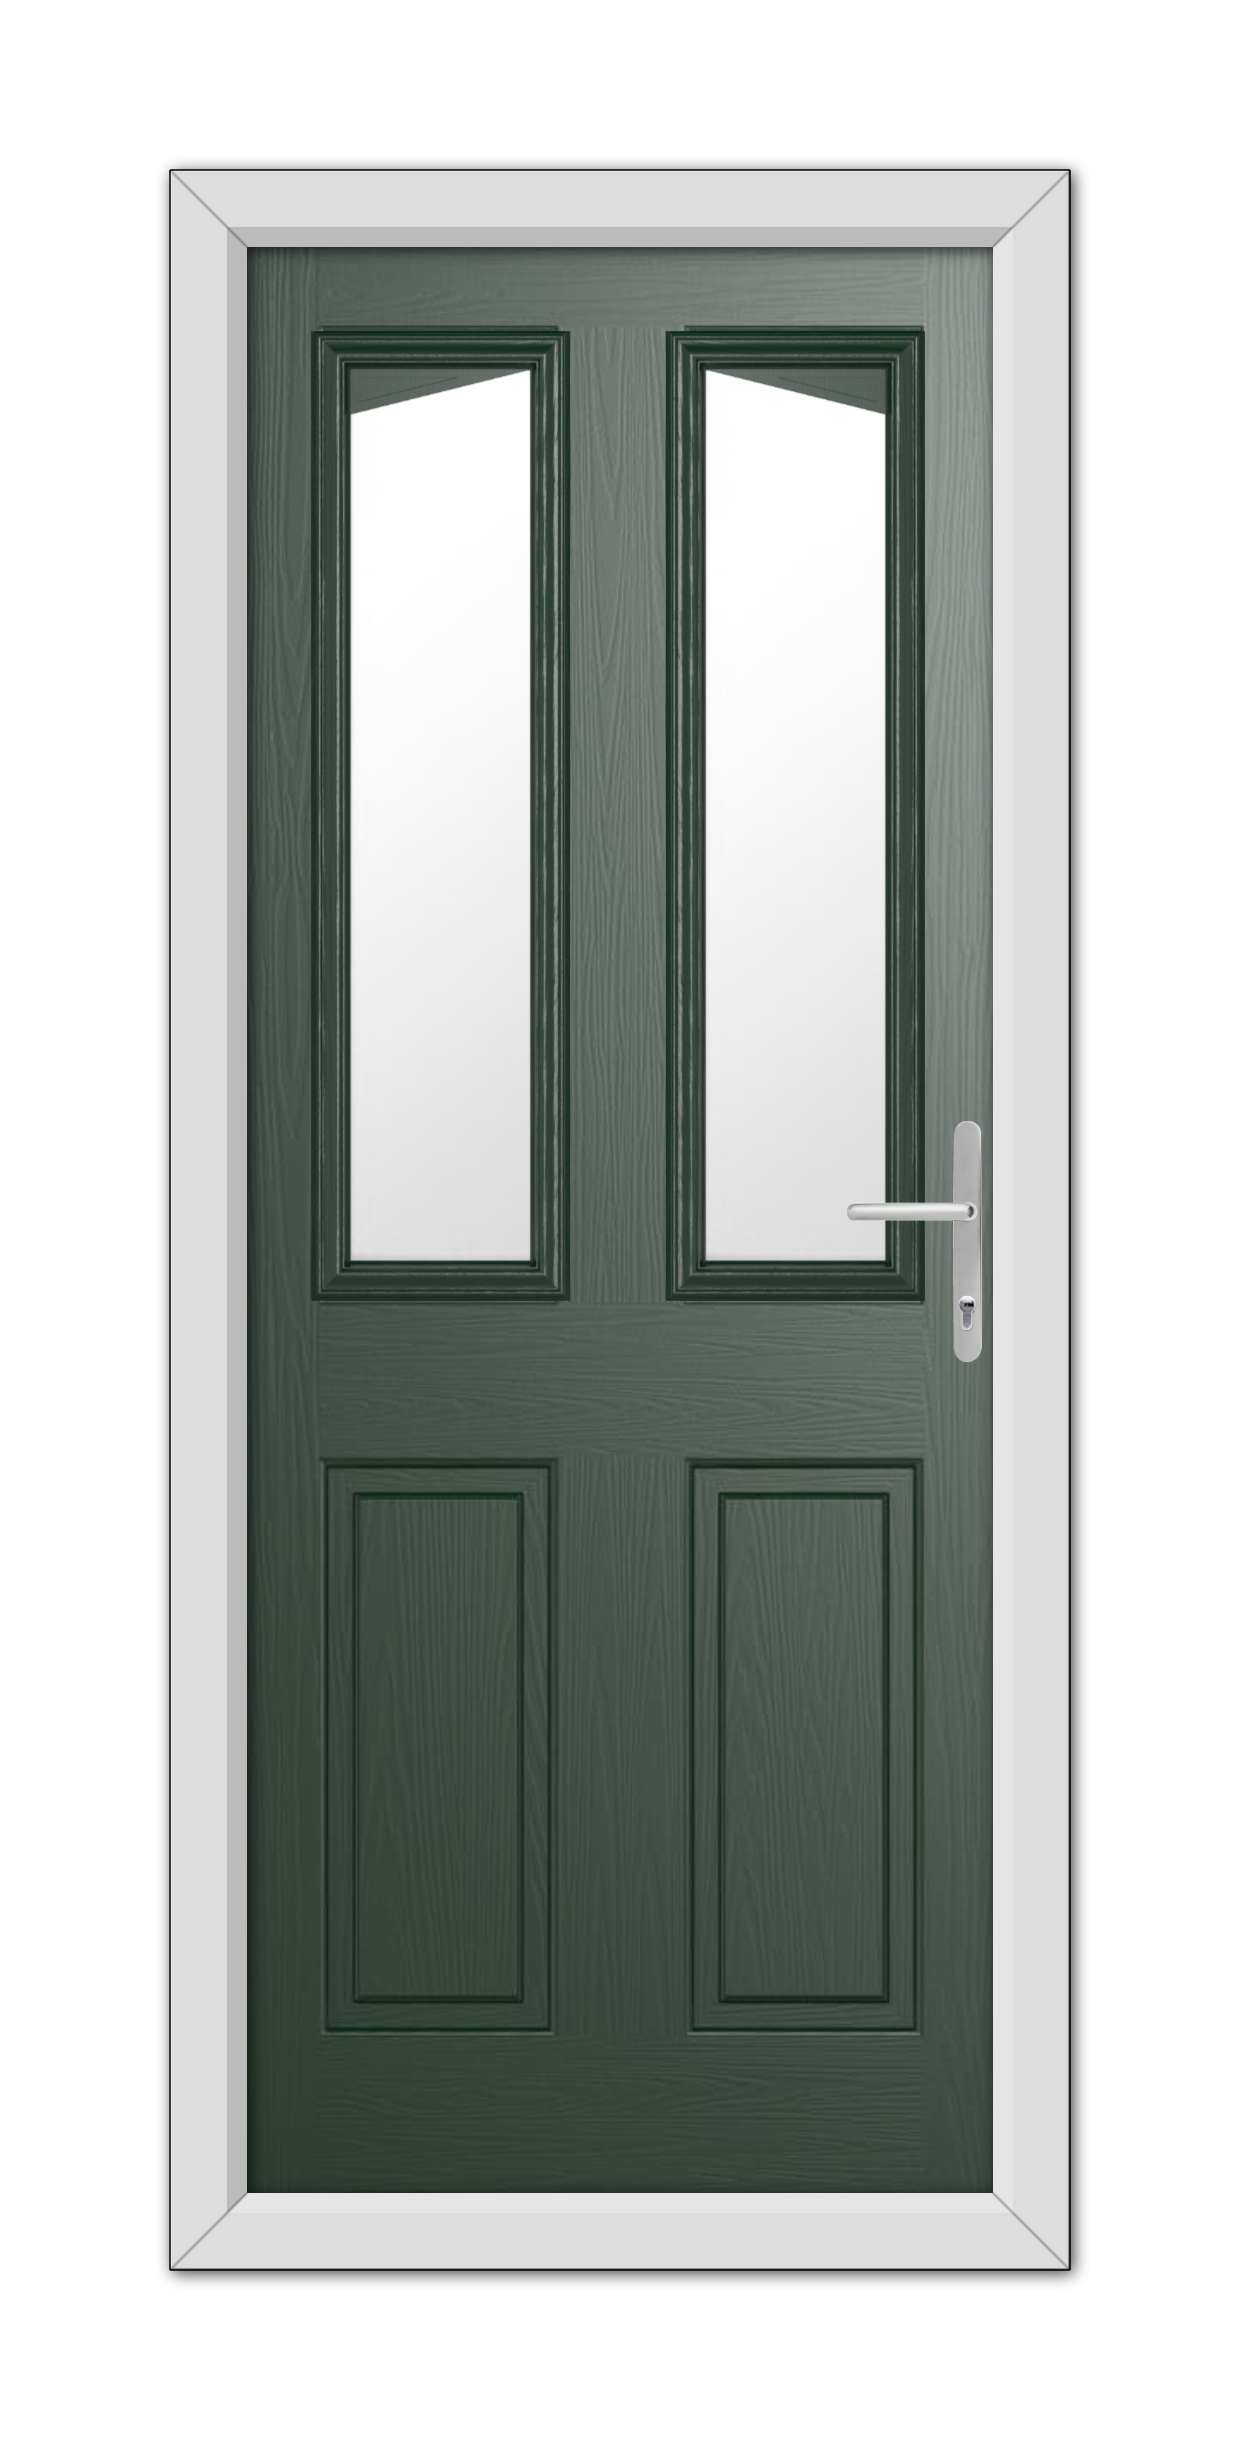 Double door with a Green Highbury Composite Door 48mm Timber Core finish and rectangular glass panels at the top, completed with a white frame and a metallic handle on the right.